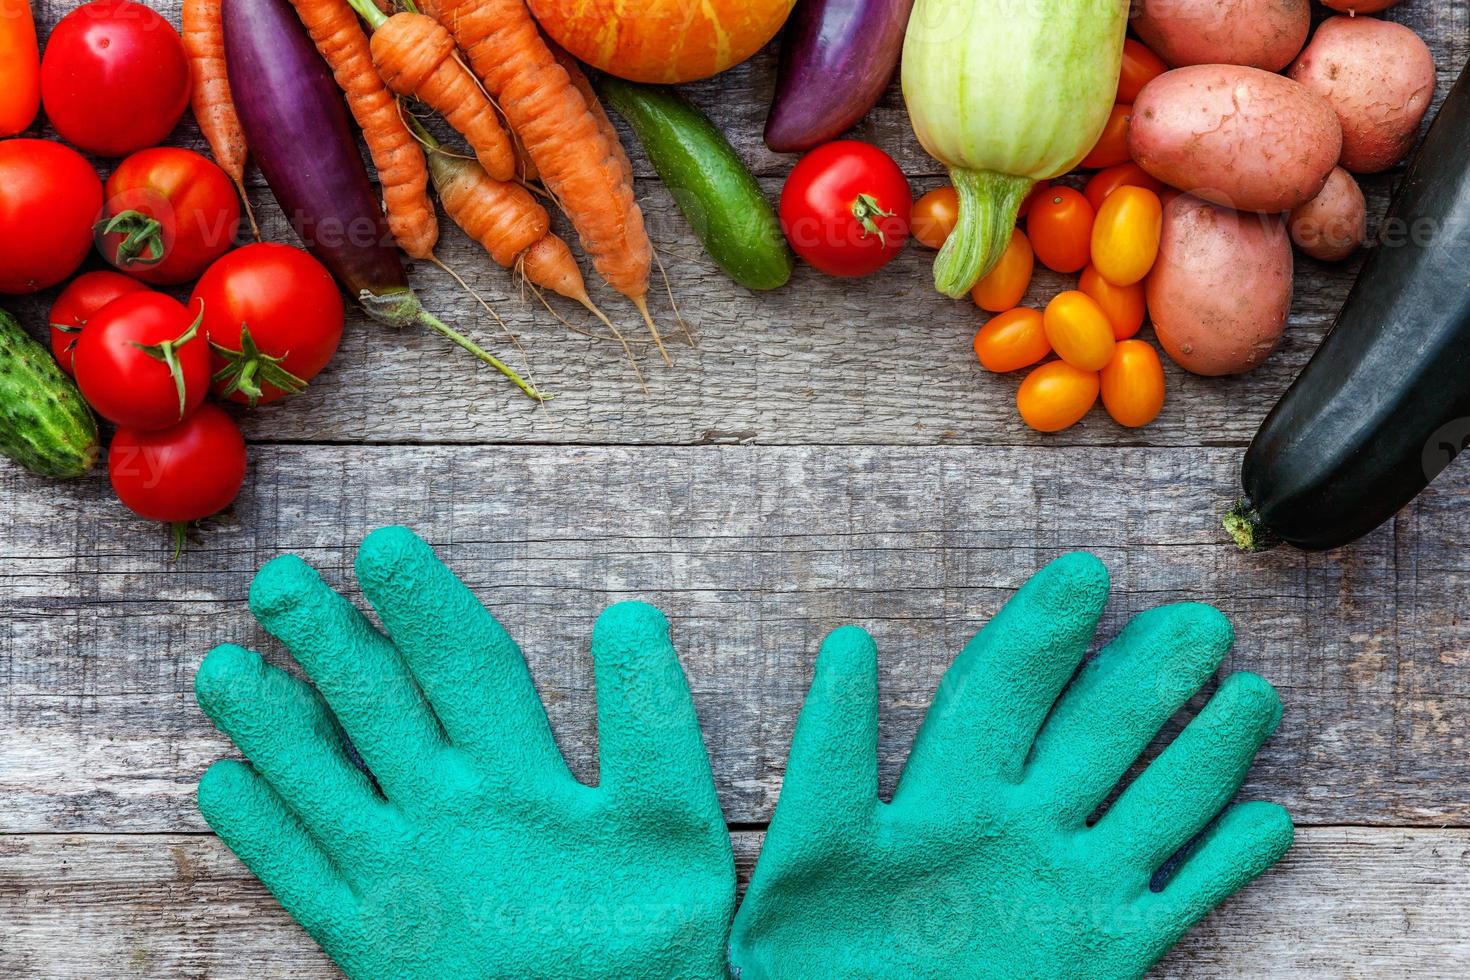 Assortment different fresh organic vegetables and gardening gloves on country style wooden background. Healthy food vegan vegetarian eating dieting concept. Local garden produce clean food. photo